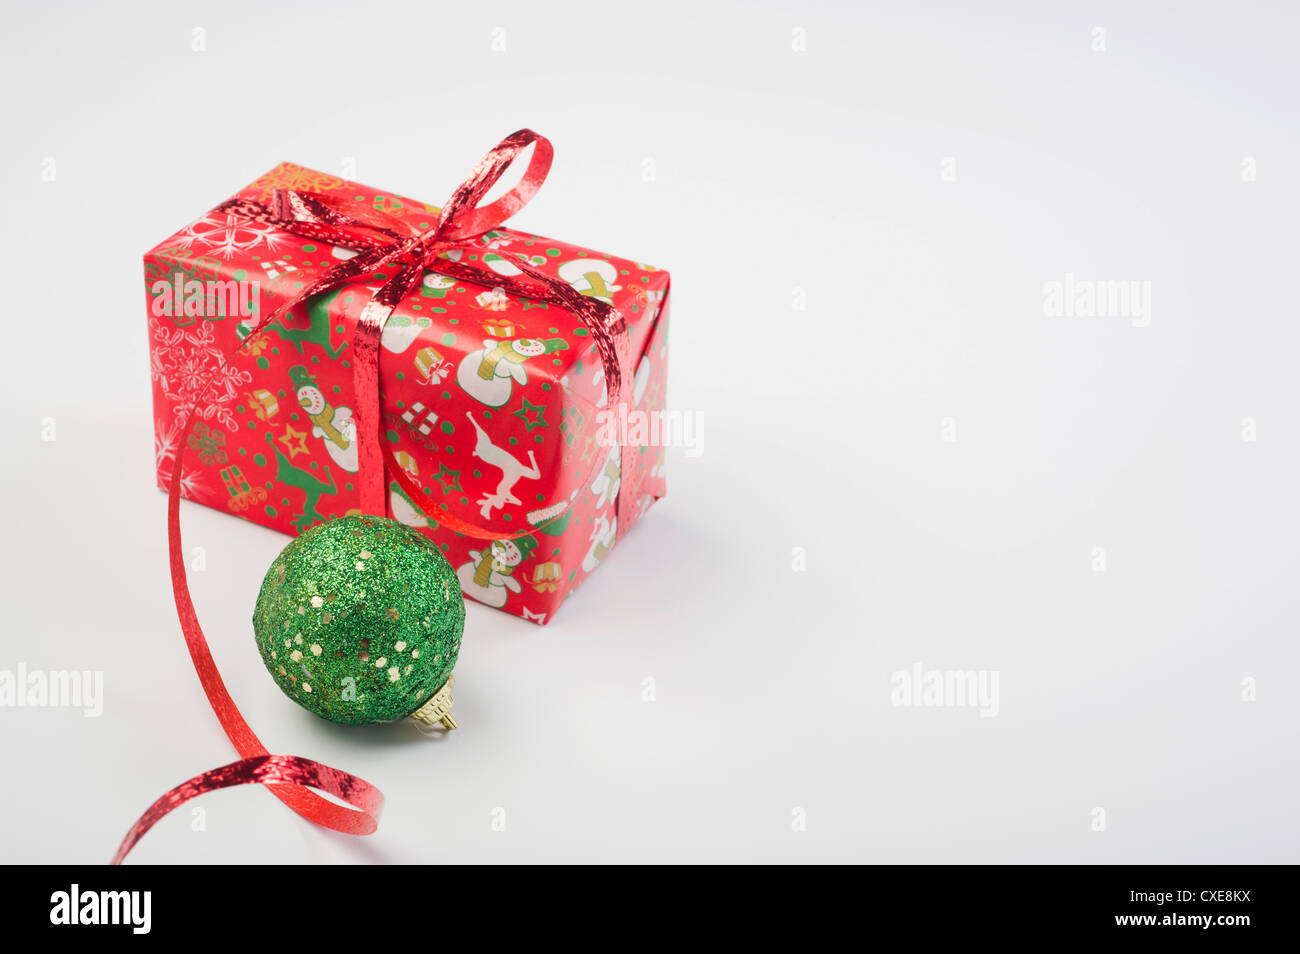 Christmas ornament and festively wrapped present Stock Photo